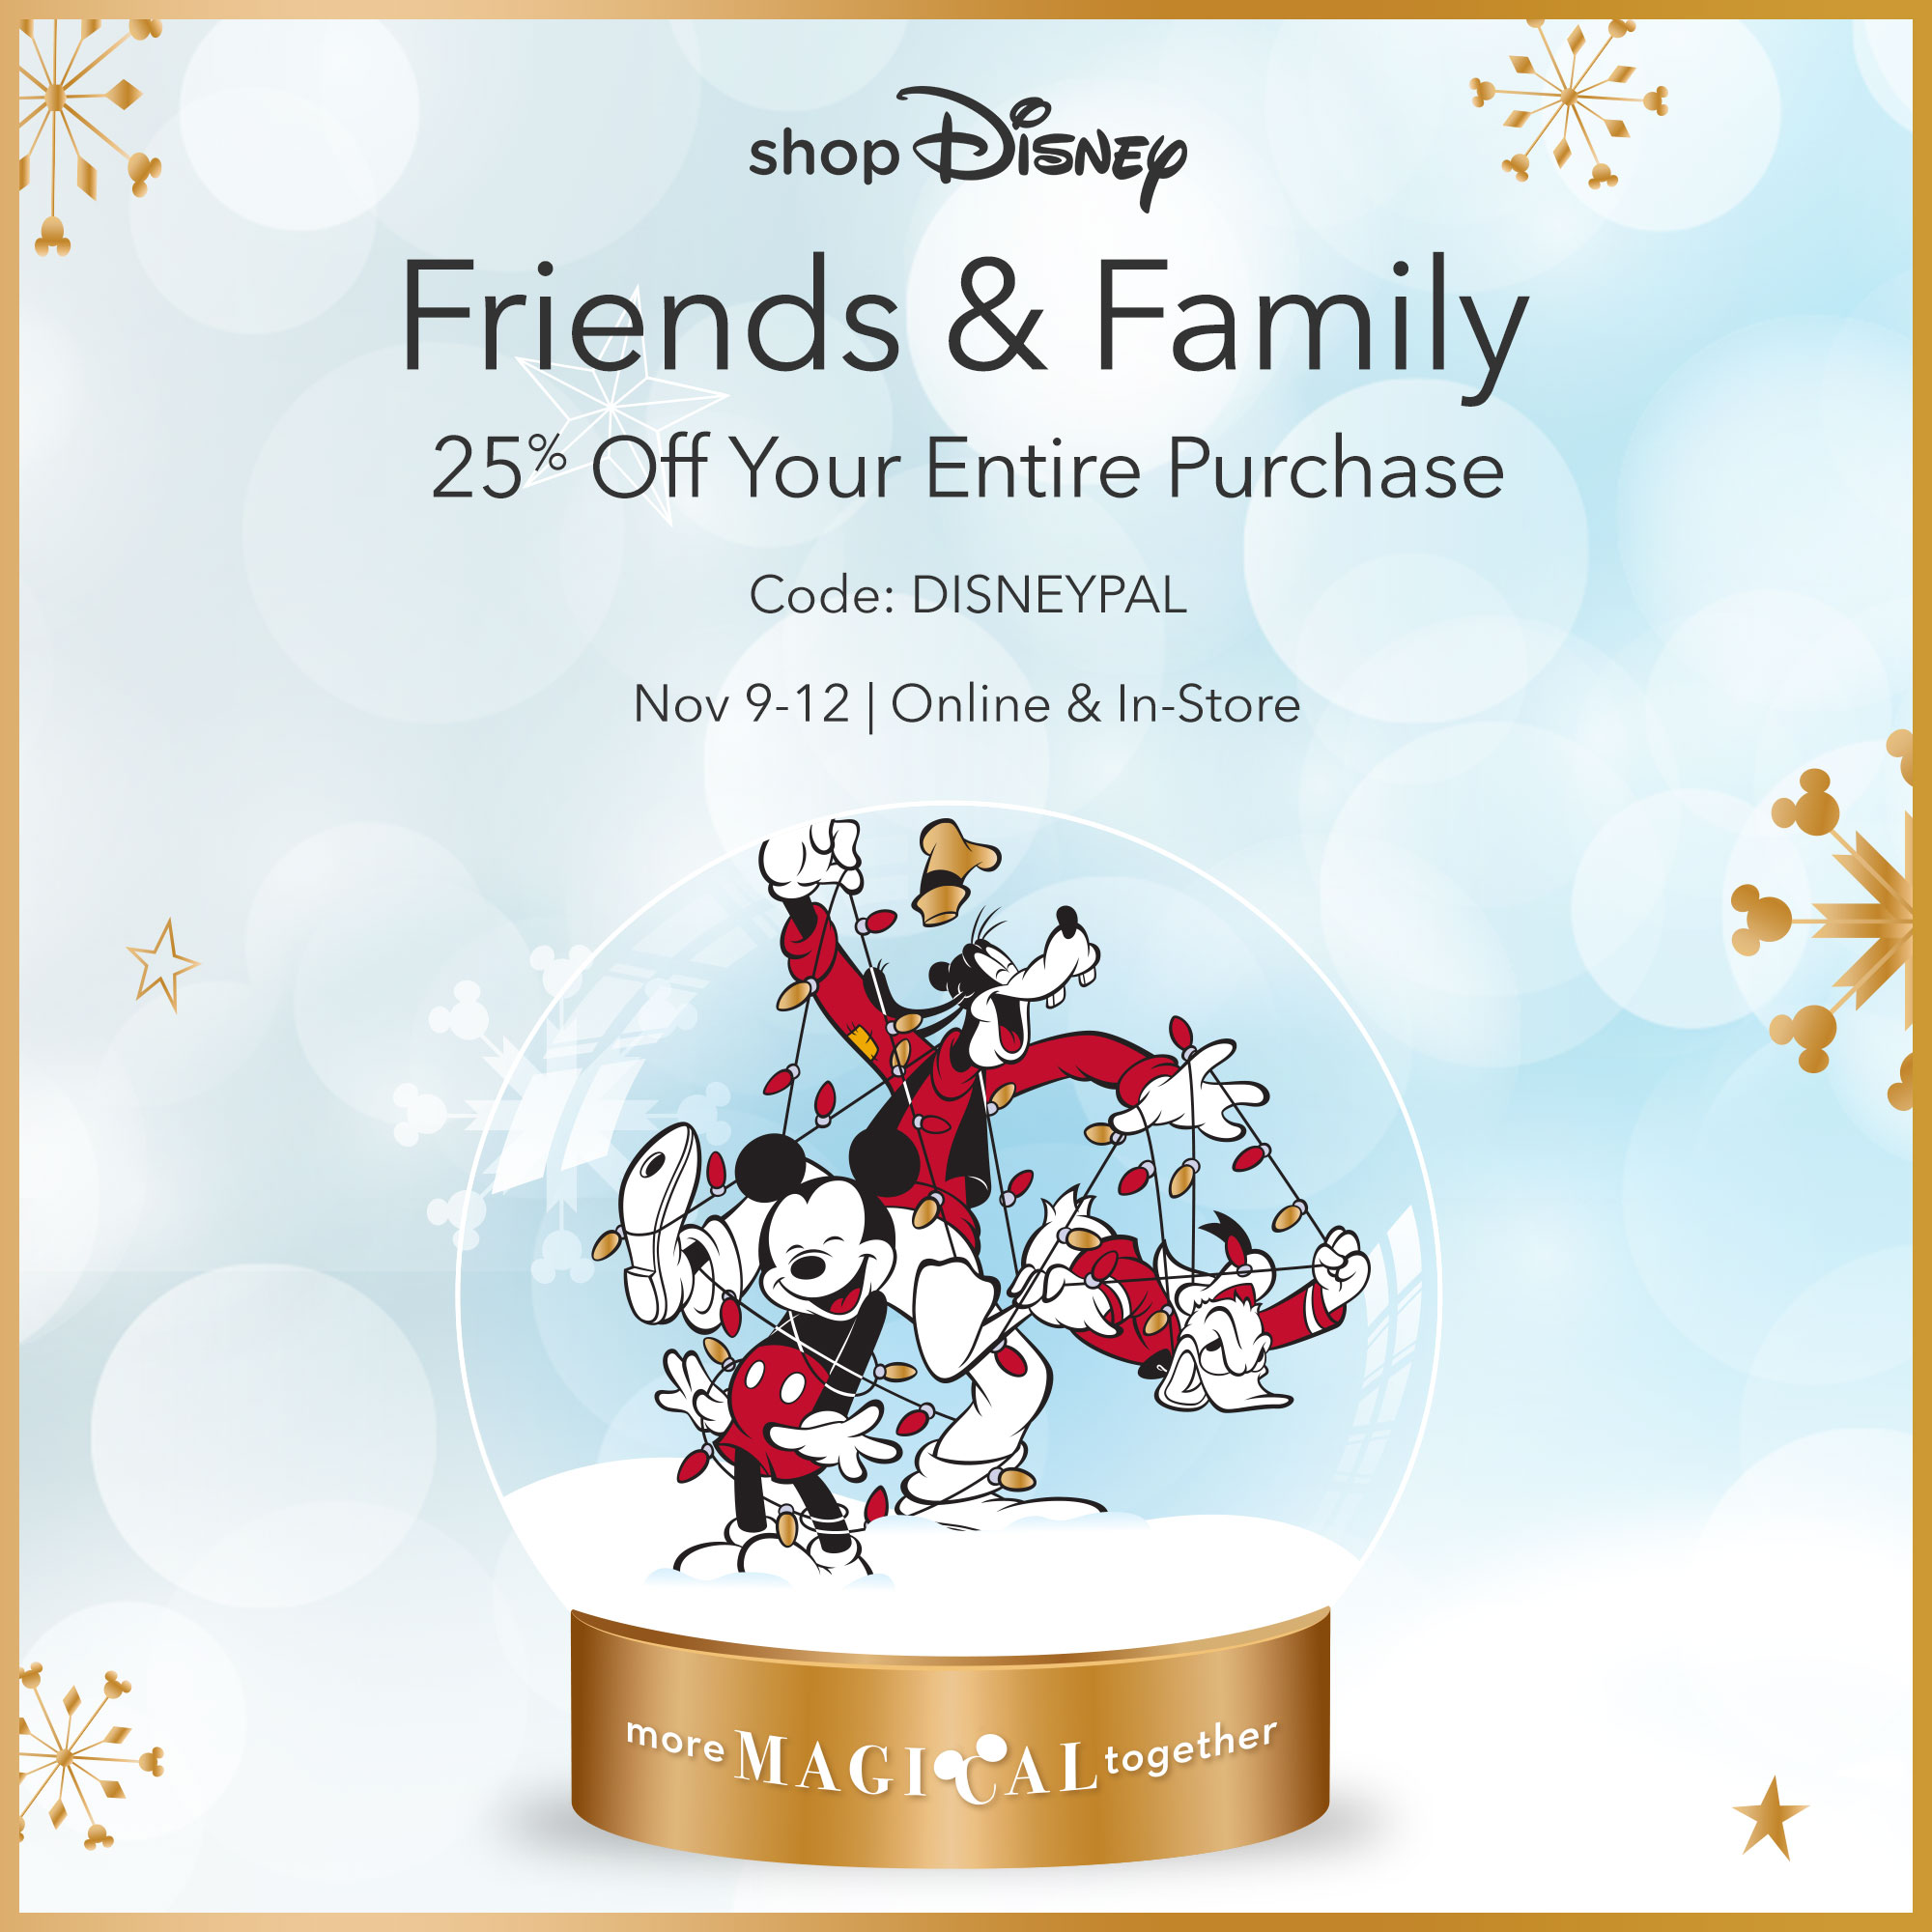 Enjoy 25 off Your Disney Favorites with the shopDisney Friends and